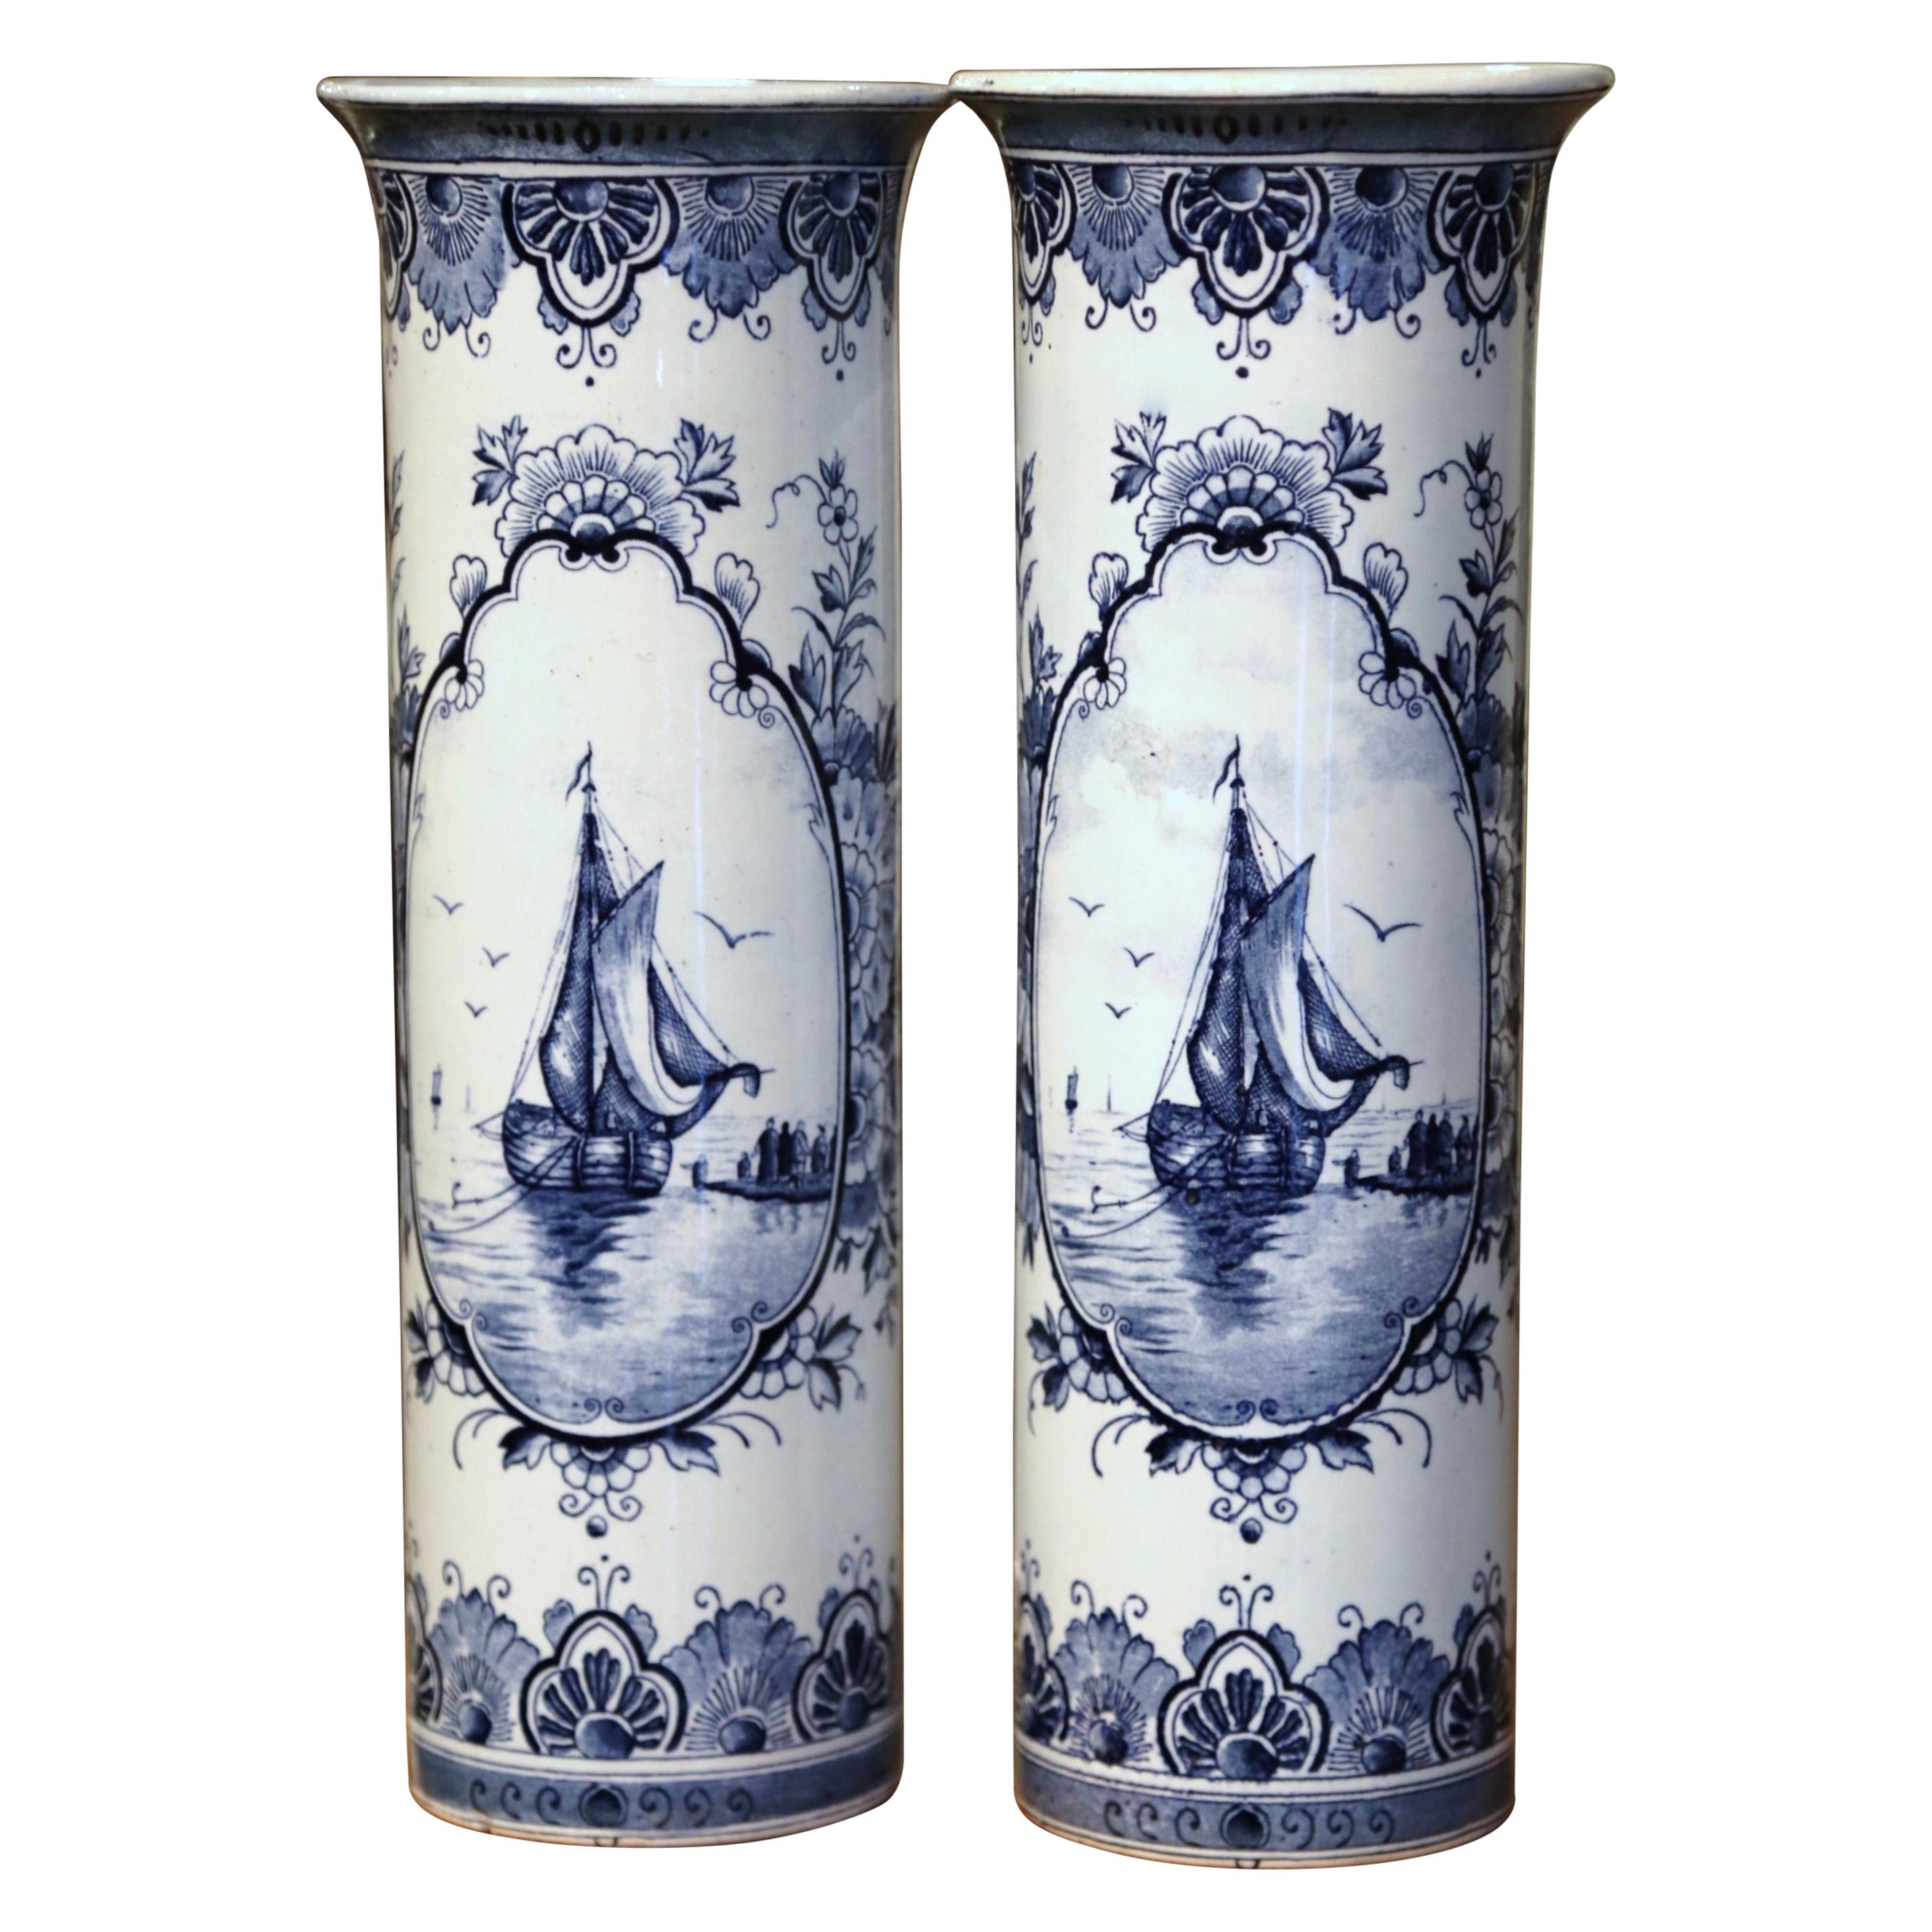 Pair of 19th Century Dutch Hand Painted Faience Delft Vases with Sailboat Motifs